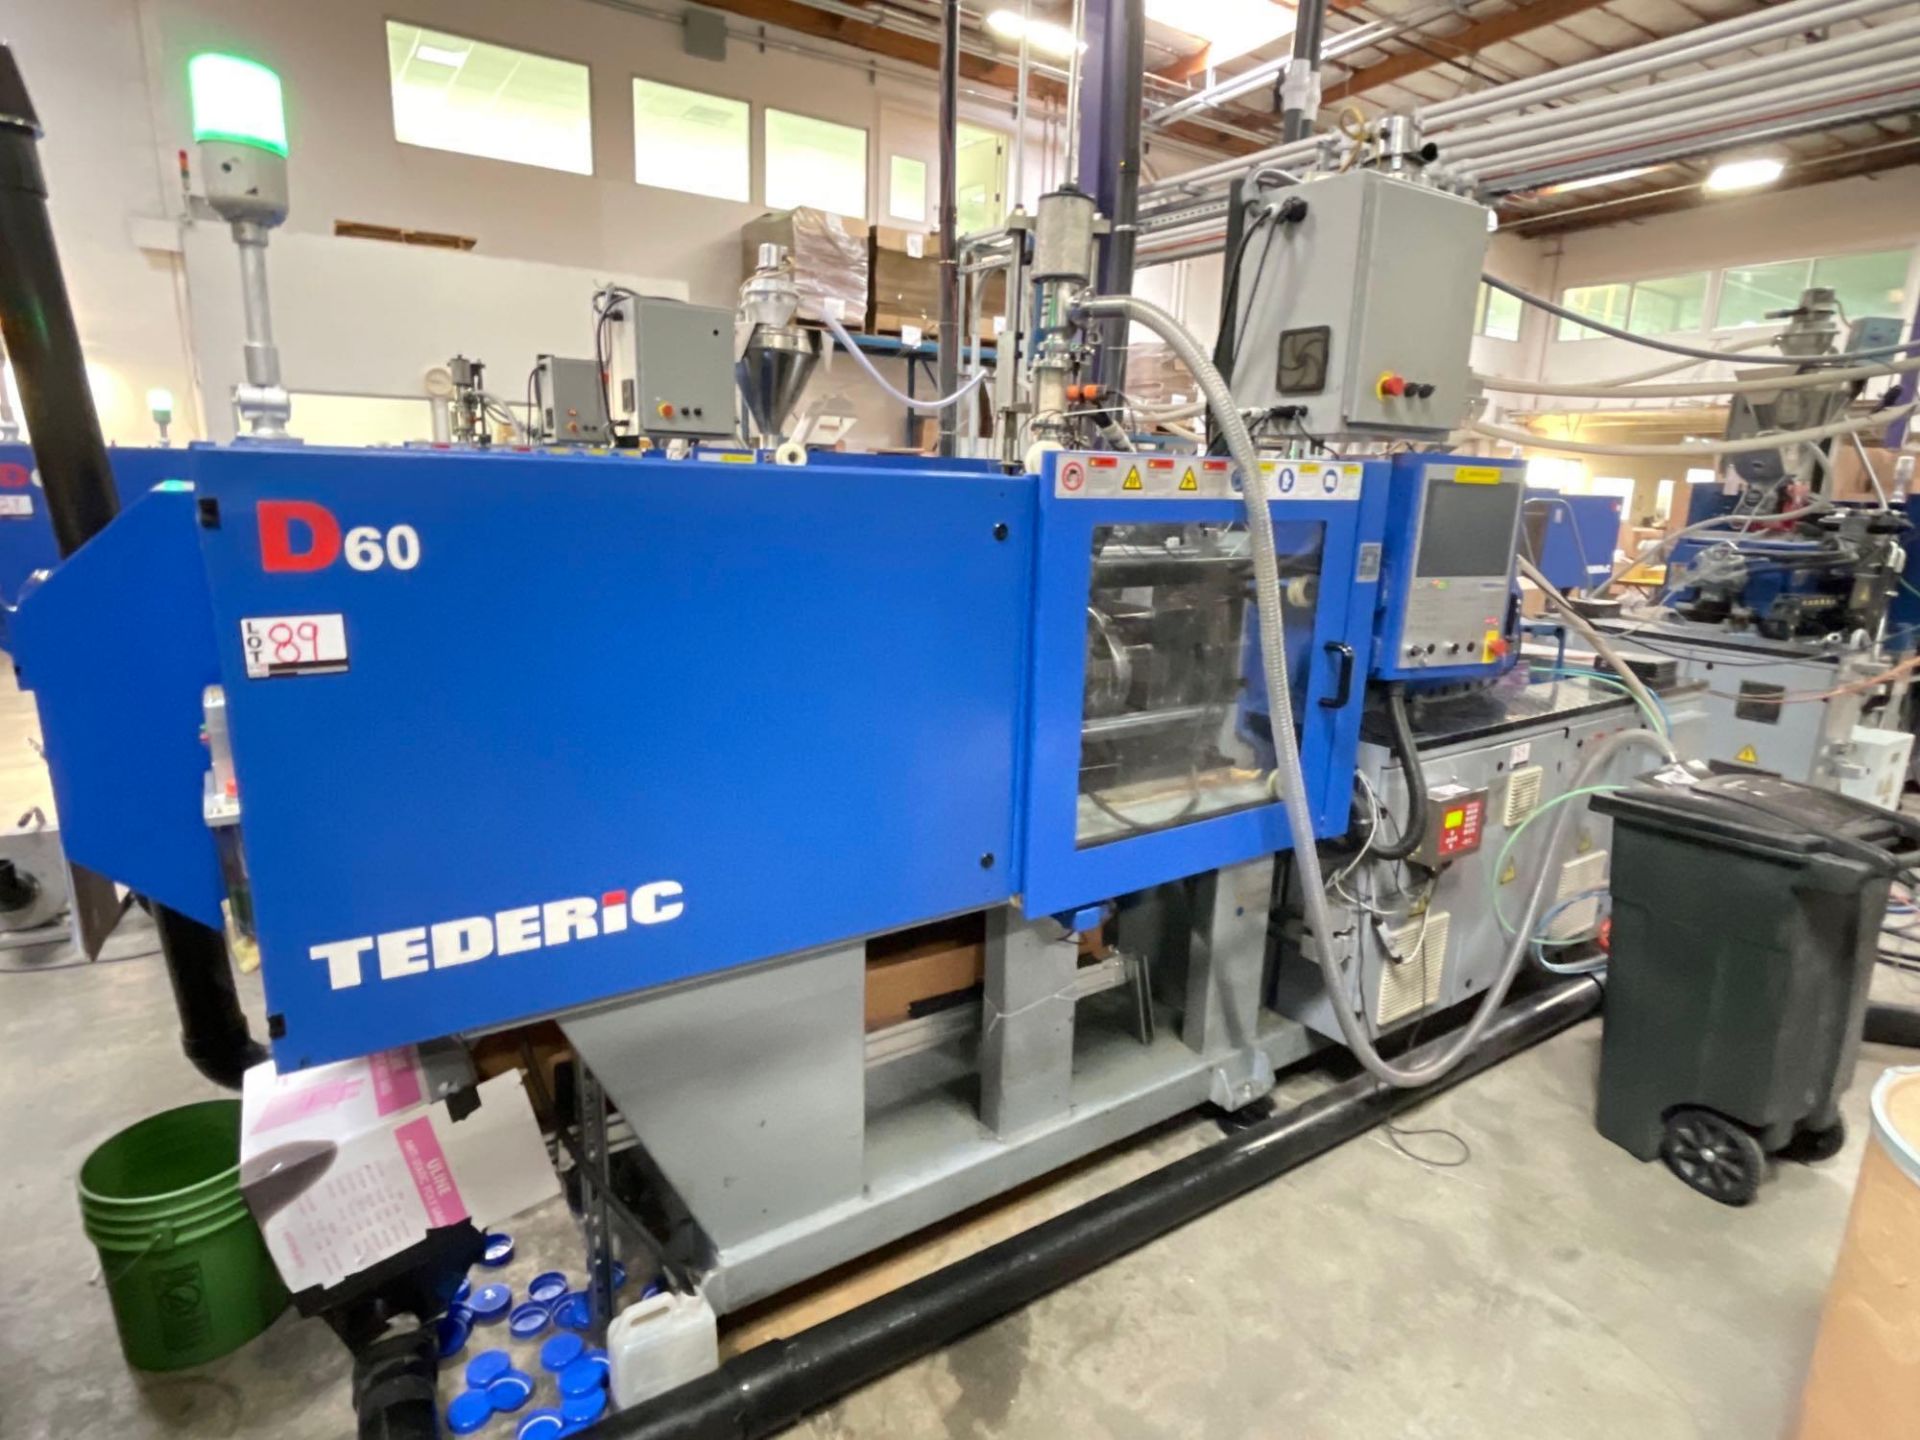 66 Ton Tederic D60 Plastic Injection Molder, Keba 12000 Control, s/n T3008-0200, New 2018 - Image 3 of 17